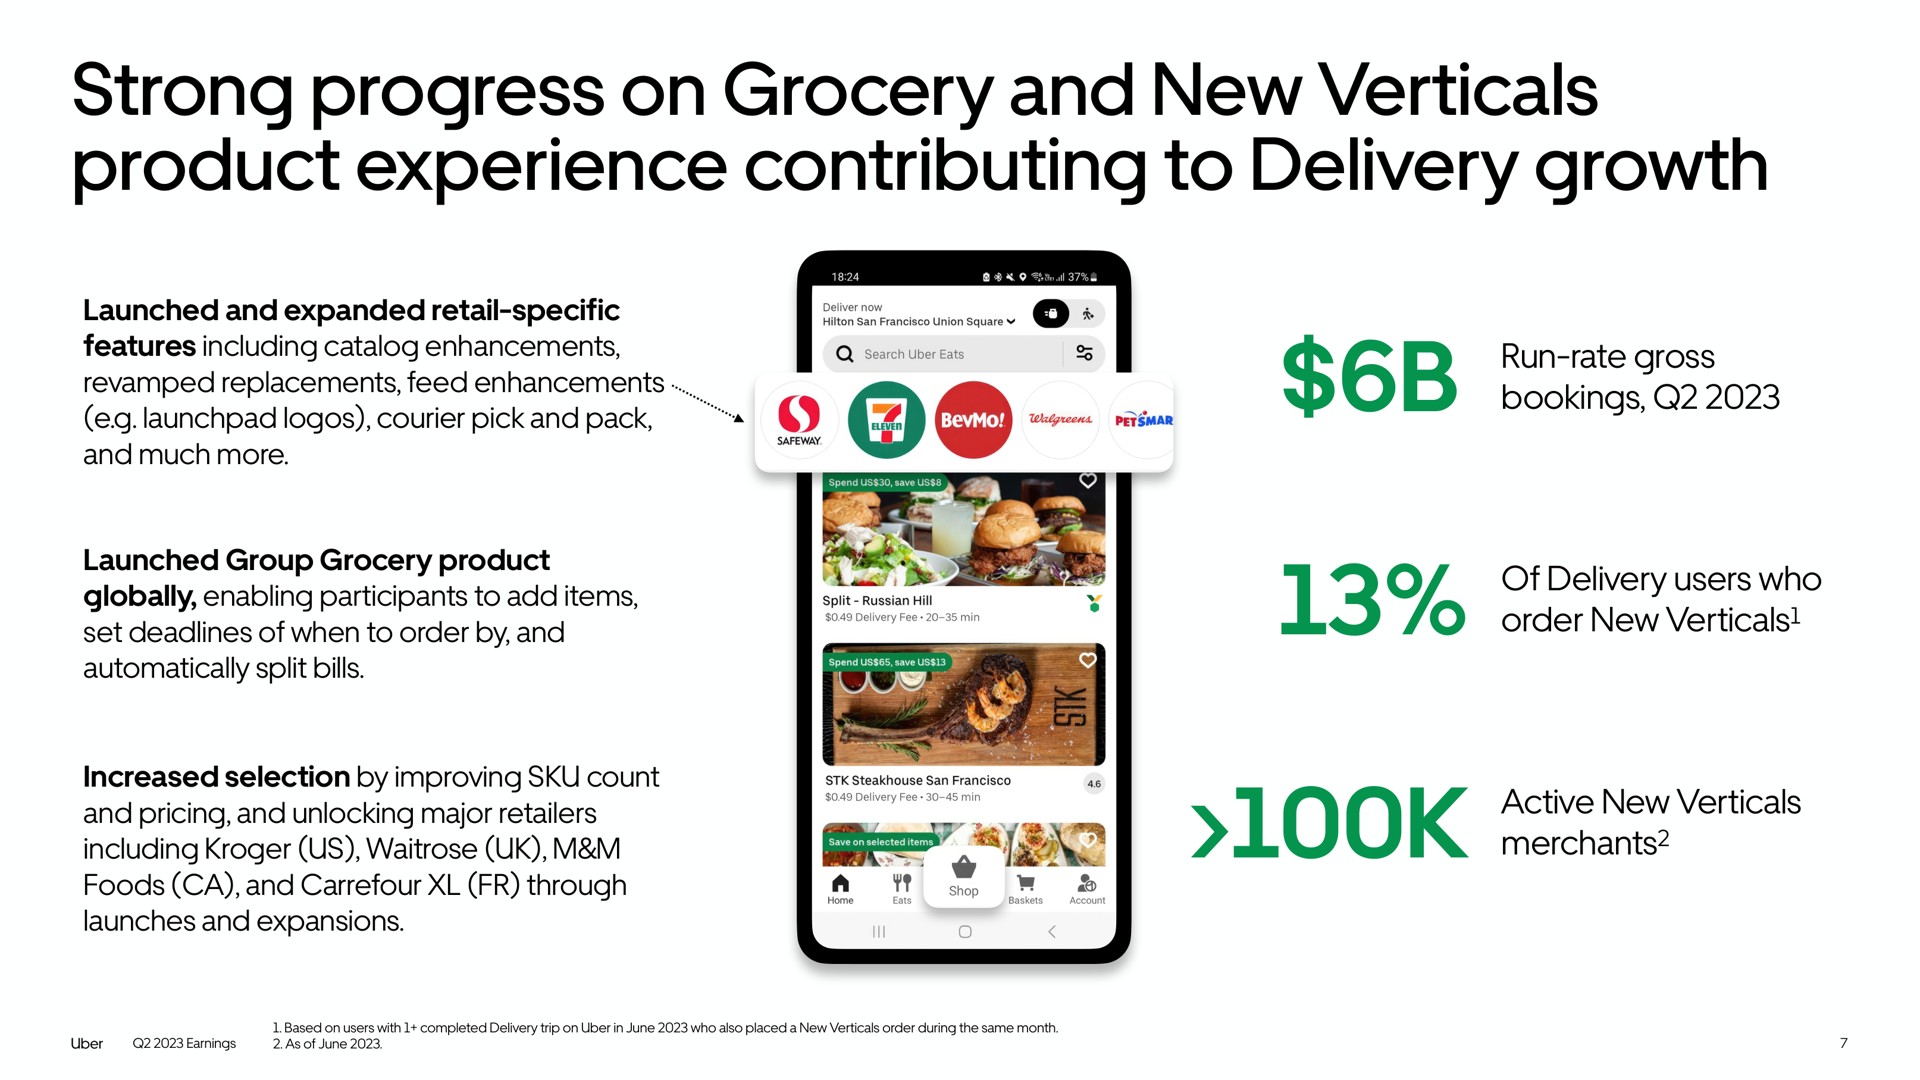 strong progress on grocery and new verticals product experience contributing to delivery growth | Uber